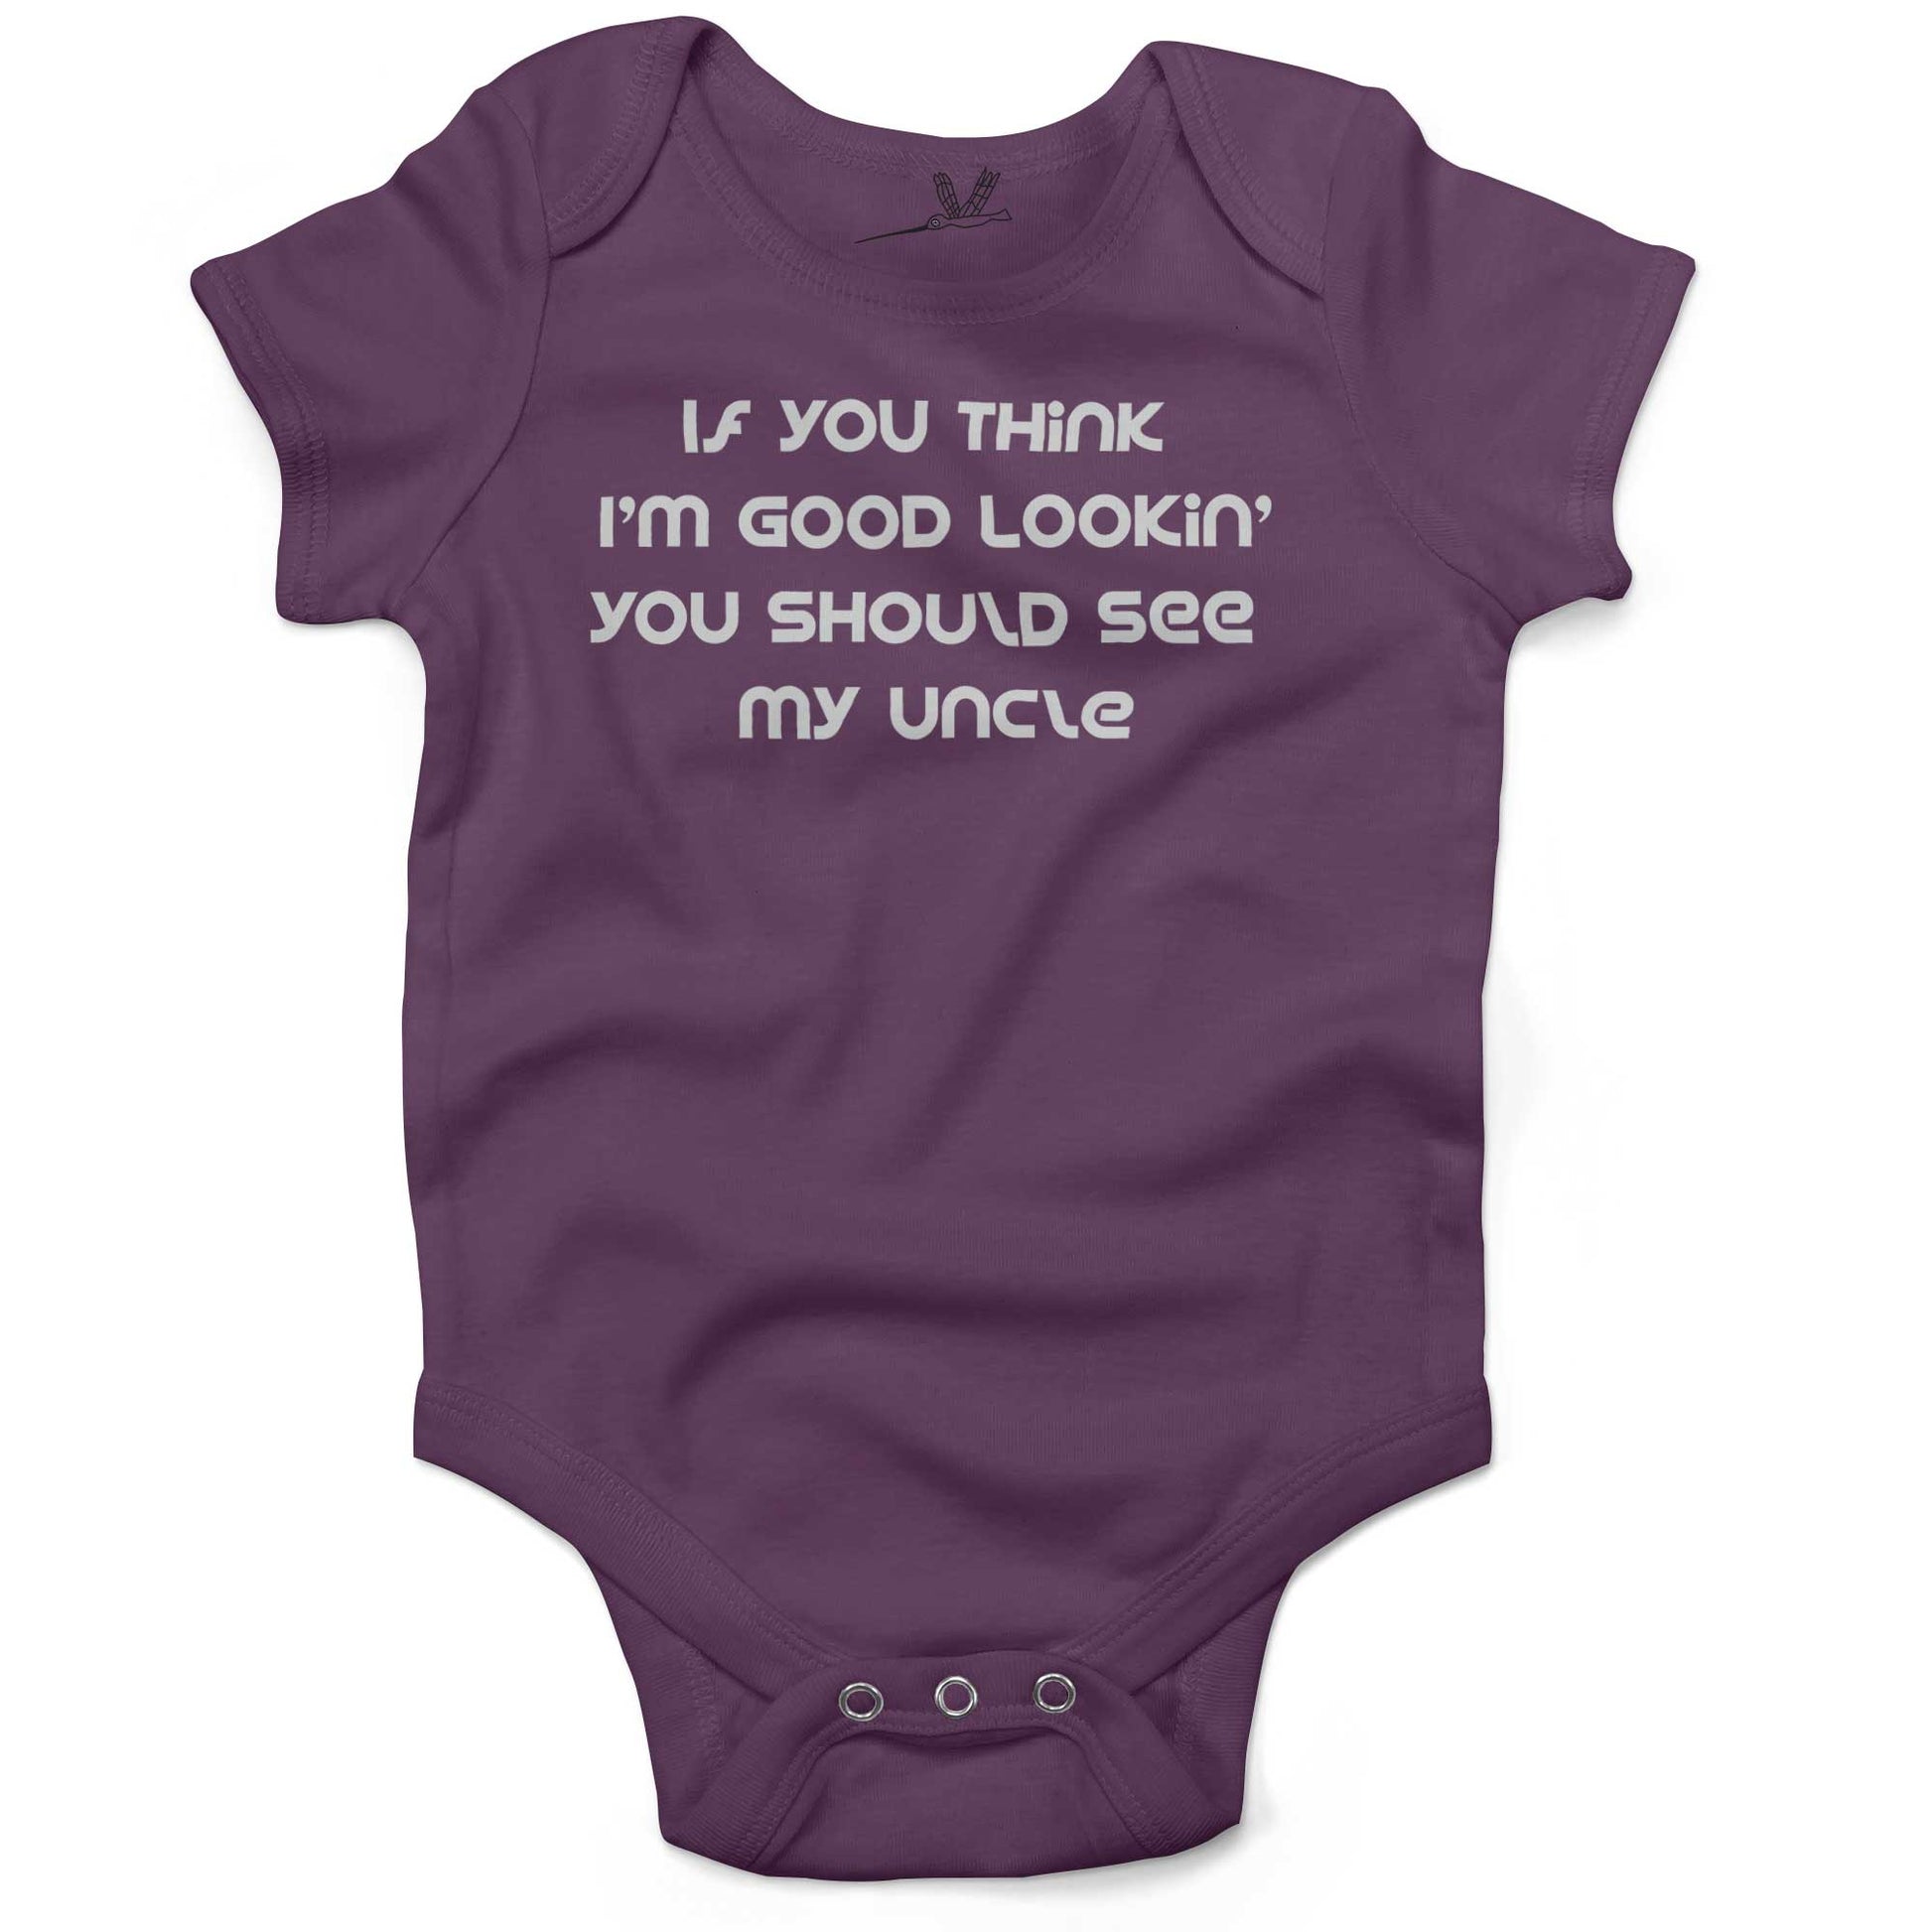 If You Think I'm Good Lookin' You Should See My Uncle Infant Bodysuit or Raglan Tee-Organic Purple-3-6 months